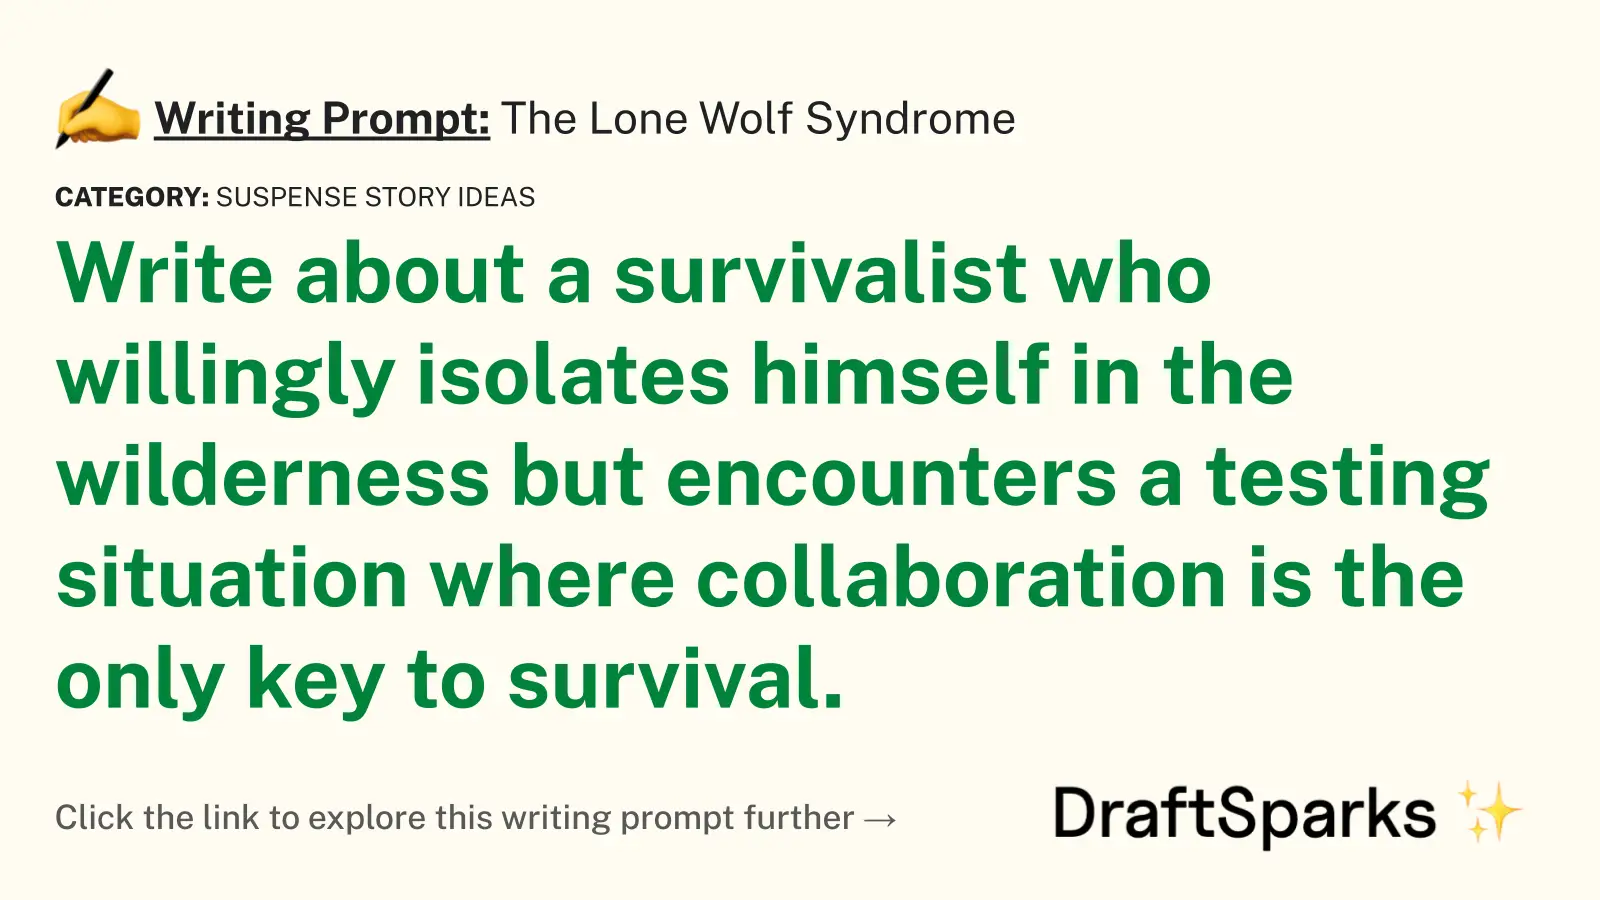 The Lone Wolf Syndrome